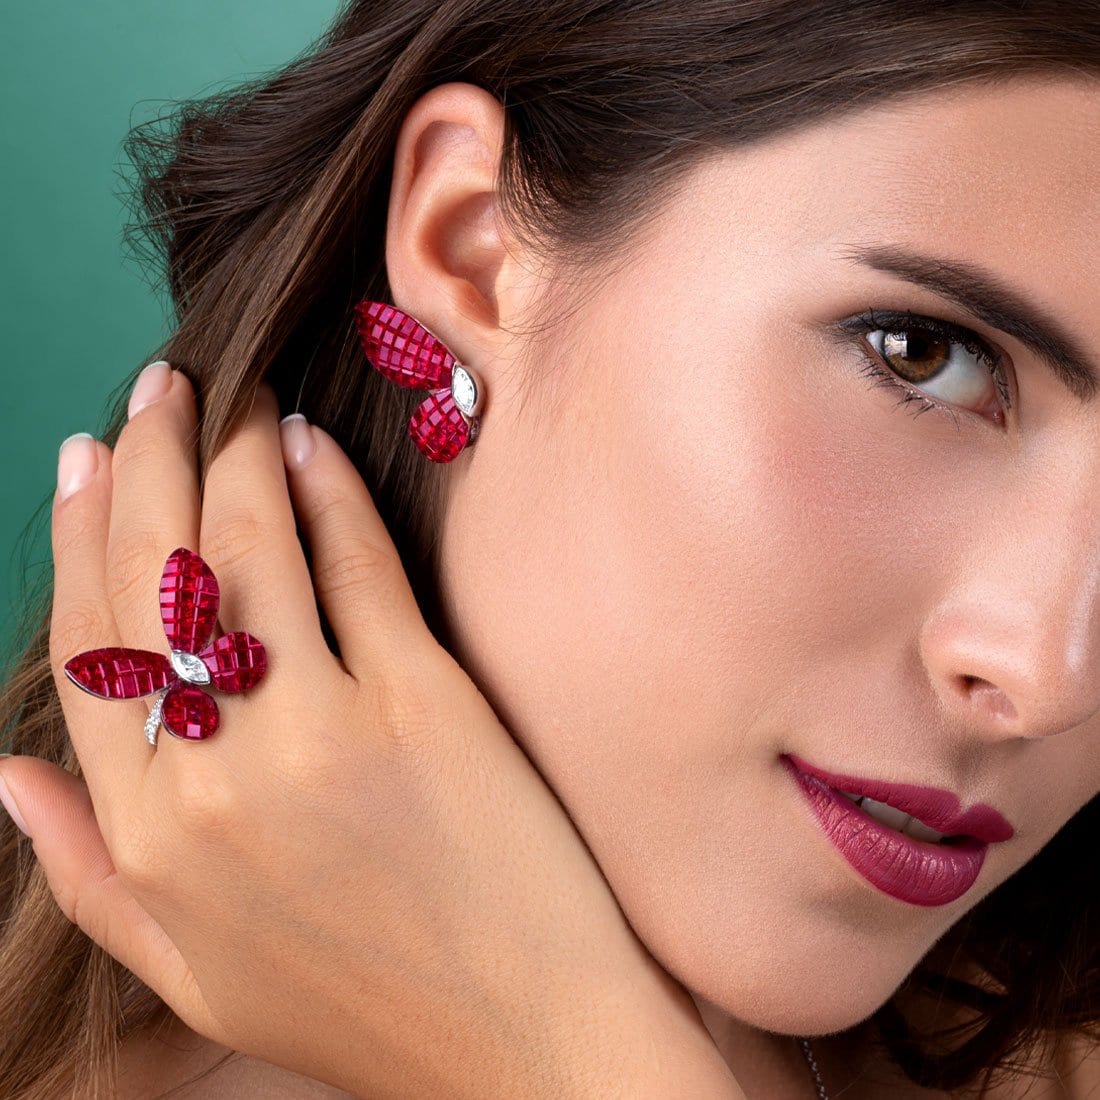 MADEMOISELLE B., round Shape Ruby Ring